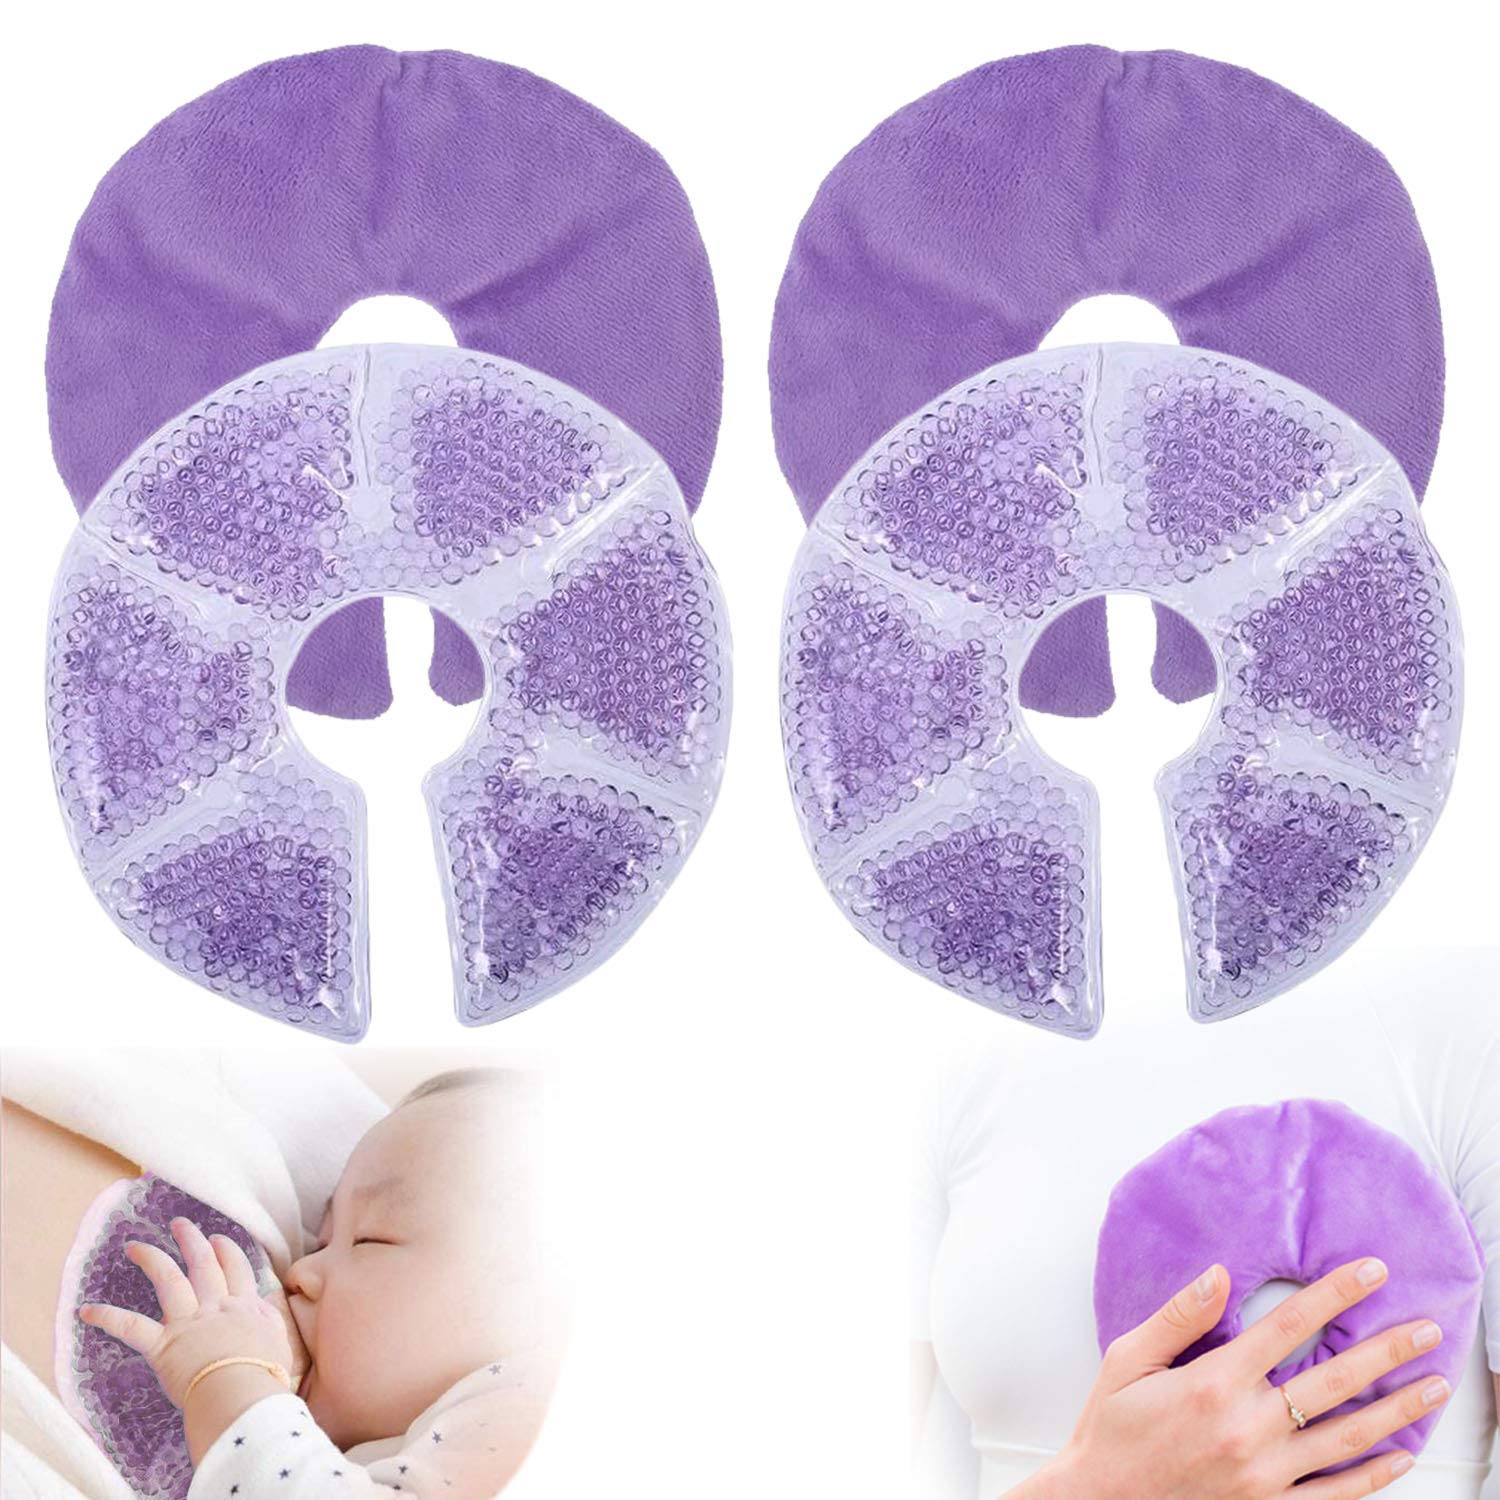 Magic Gel Breast Therapy Pack Nursing Pads Cold & Warm Compress for  Breastfeeding, 5-Pack